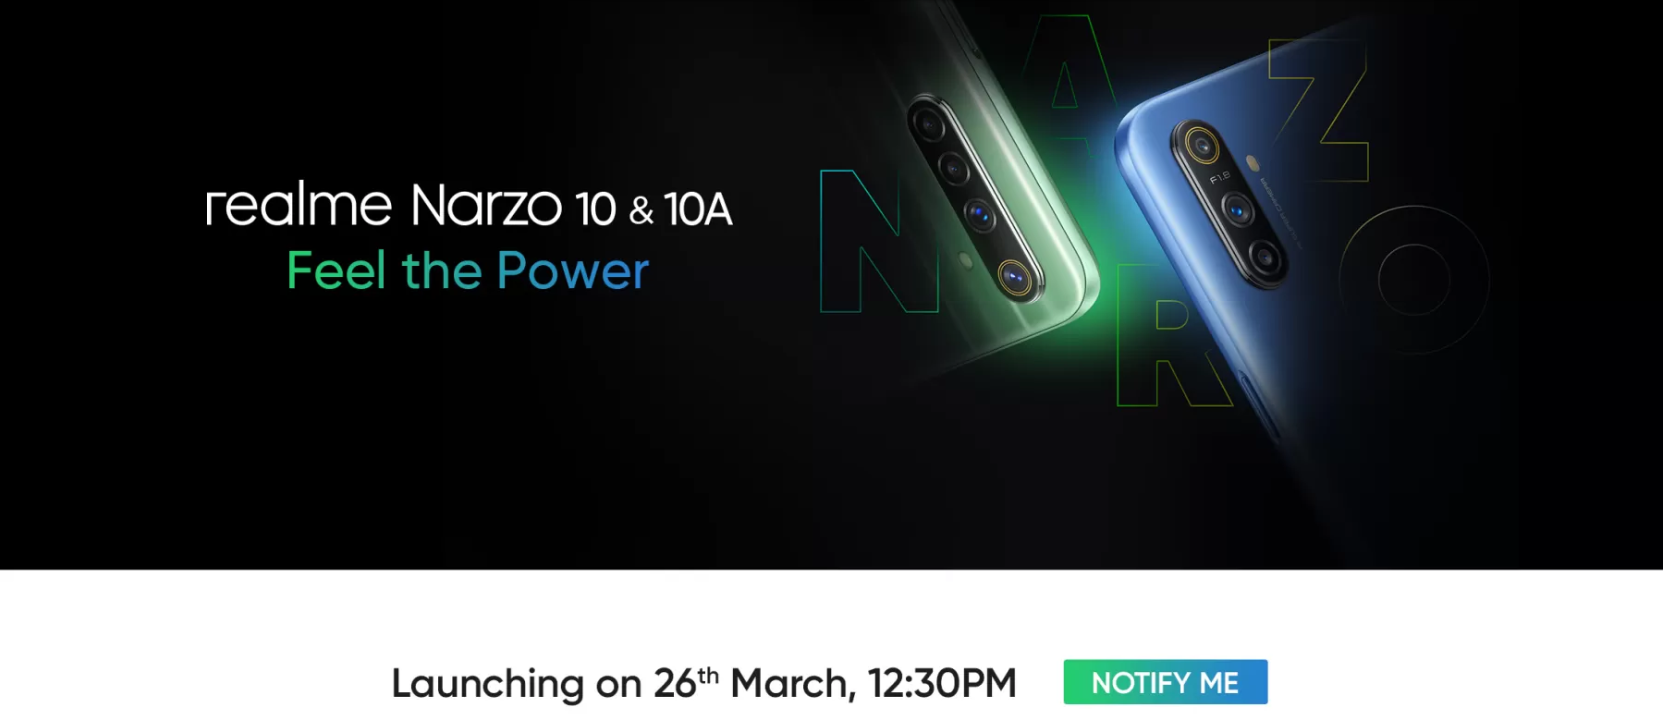 Realme Narzo to debut on March 26